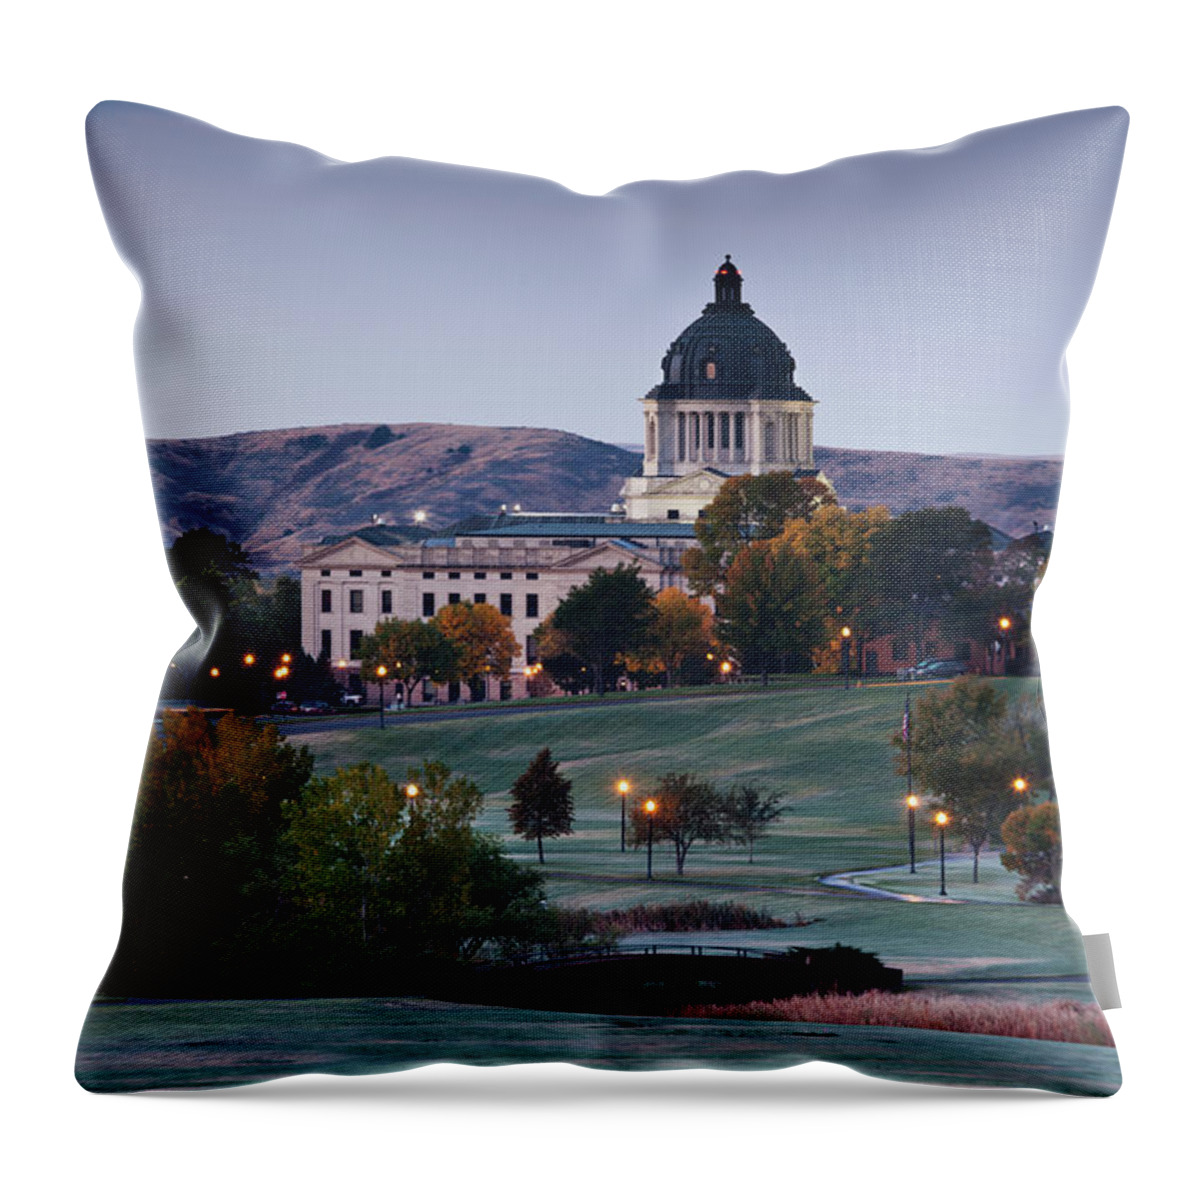 Tranquility Throw Pillow featuring the photograph Pierre, South Dakota, Exterior View by Walter Bibikow